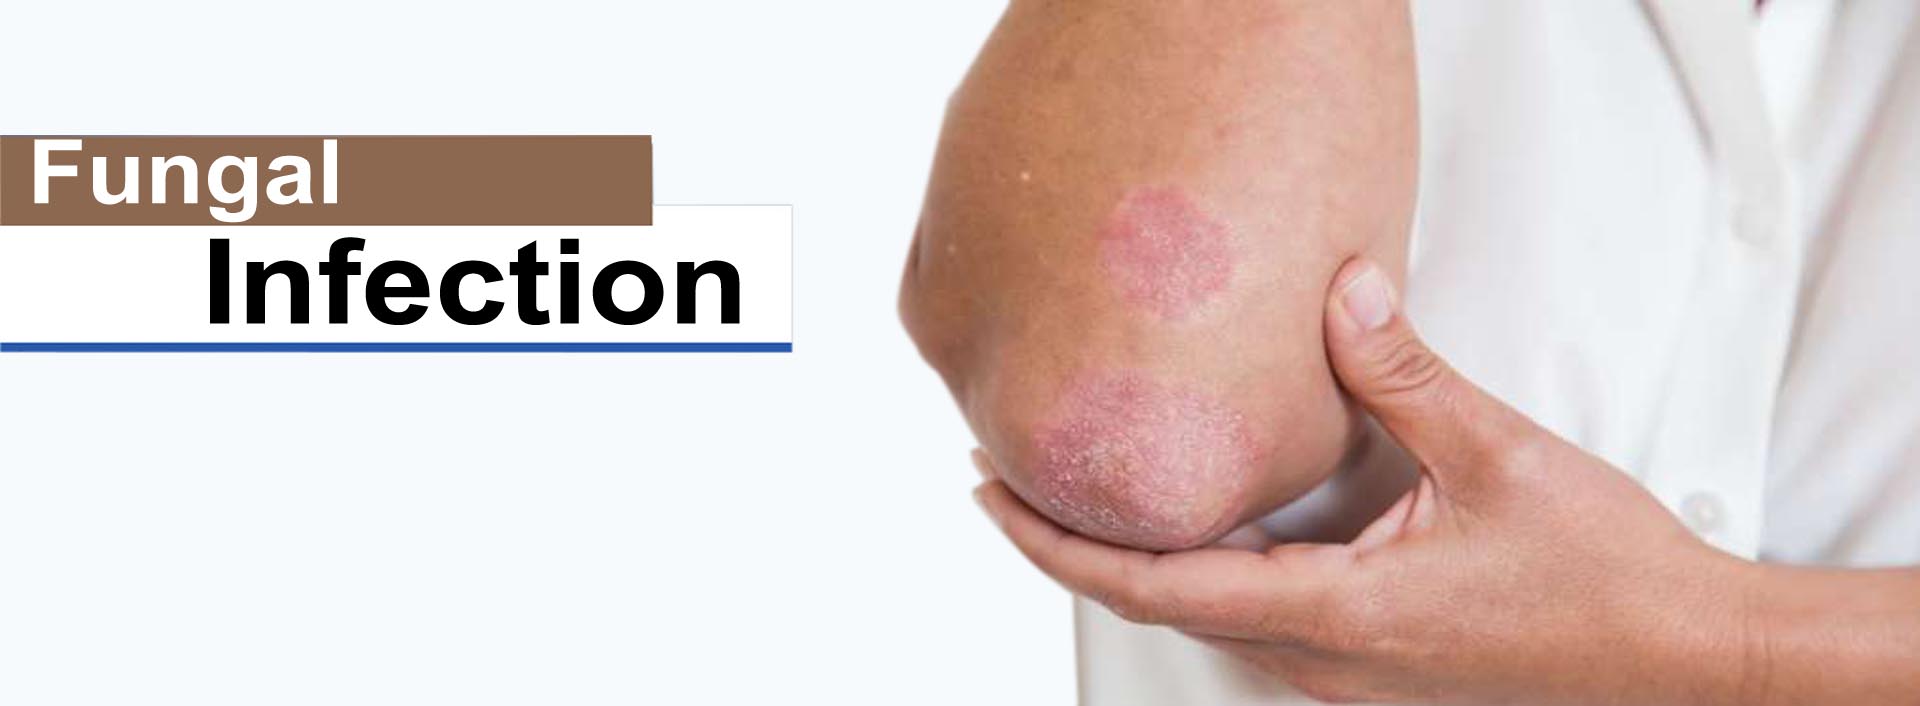 Fungal Infection Treatment in Gurgaon